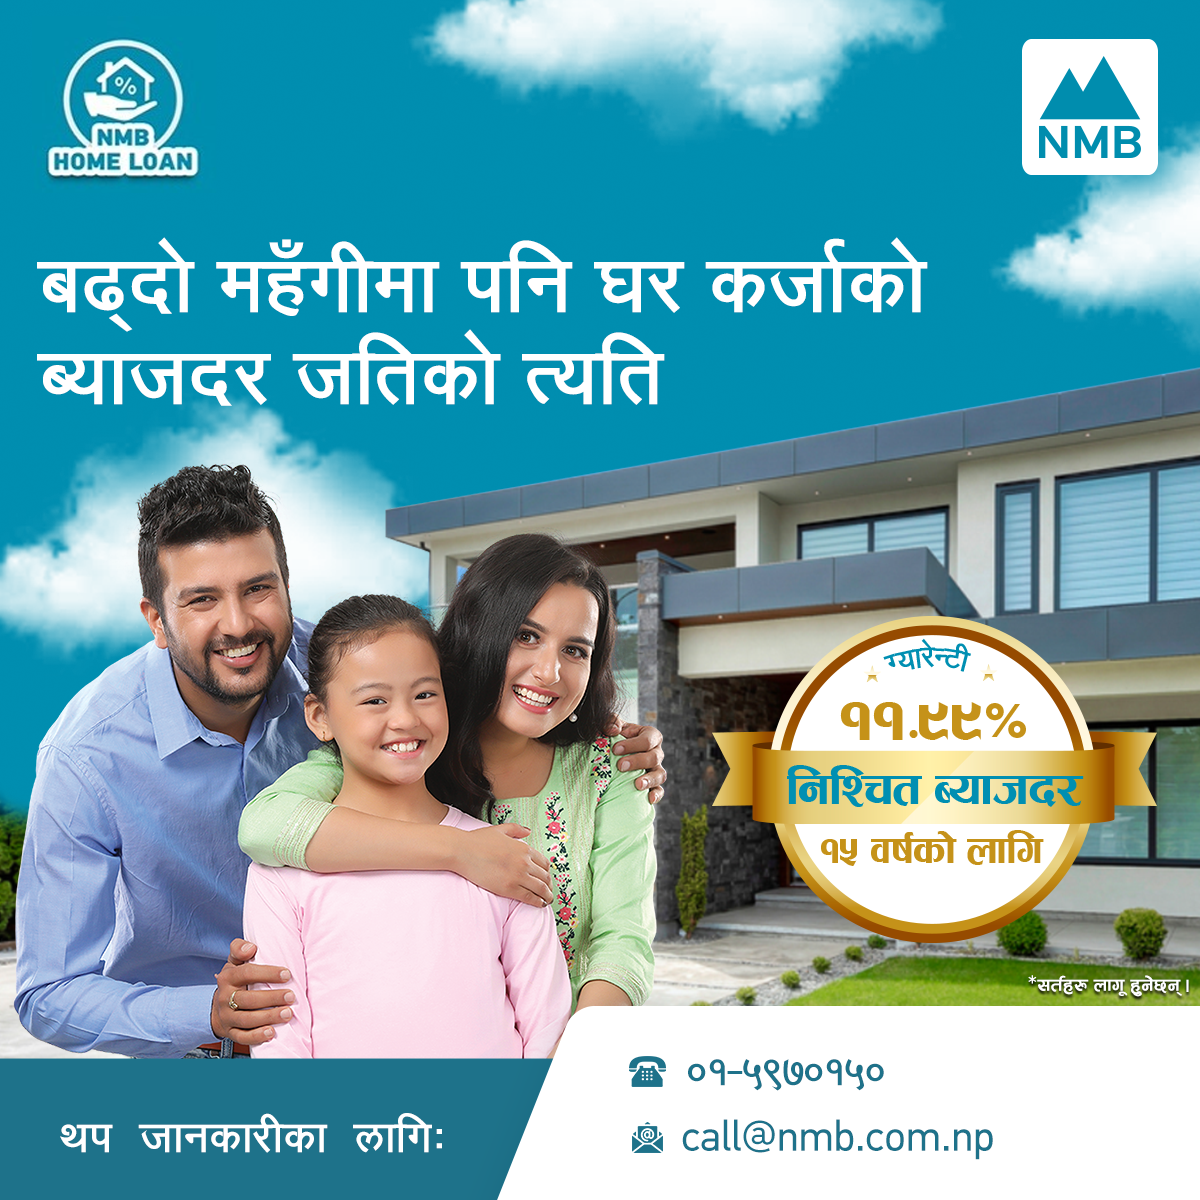 NMB Bank introduces fixed interest rate on home loan at 11.99% for 15 years